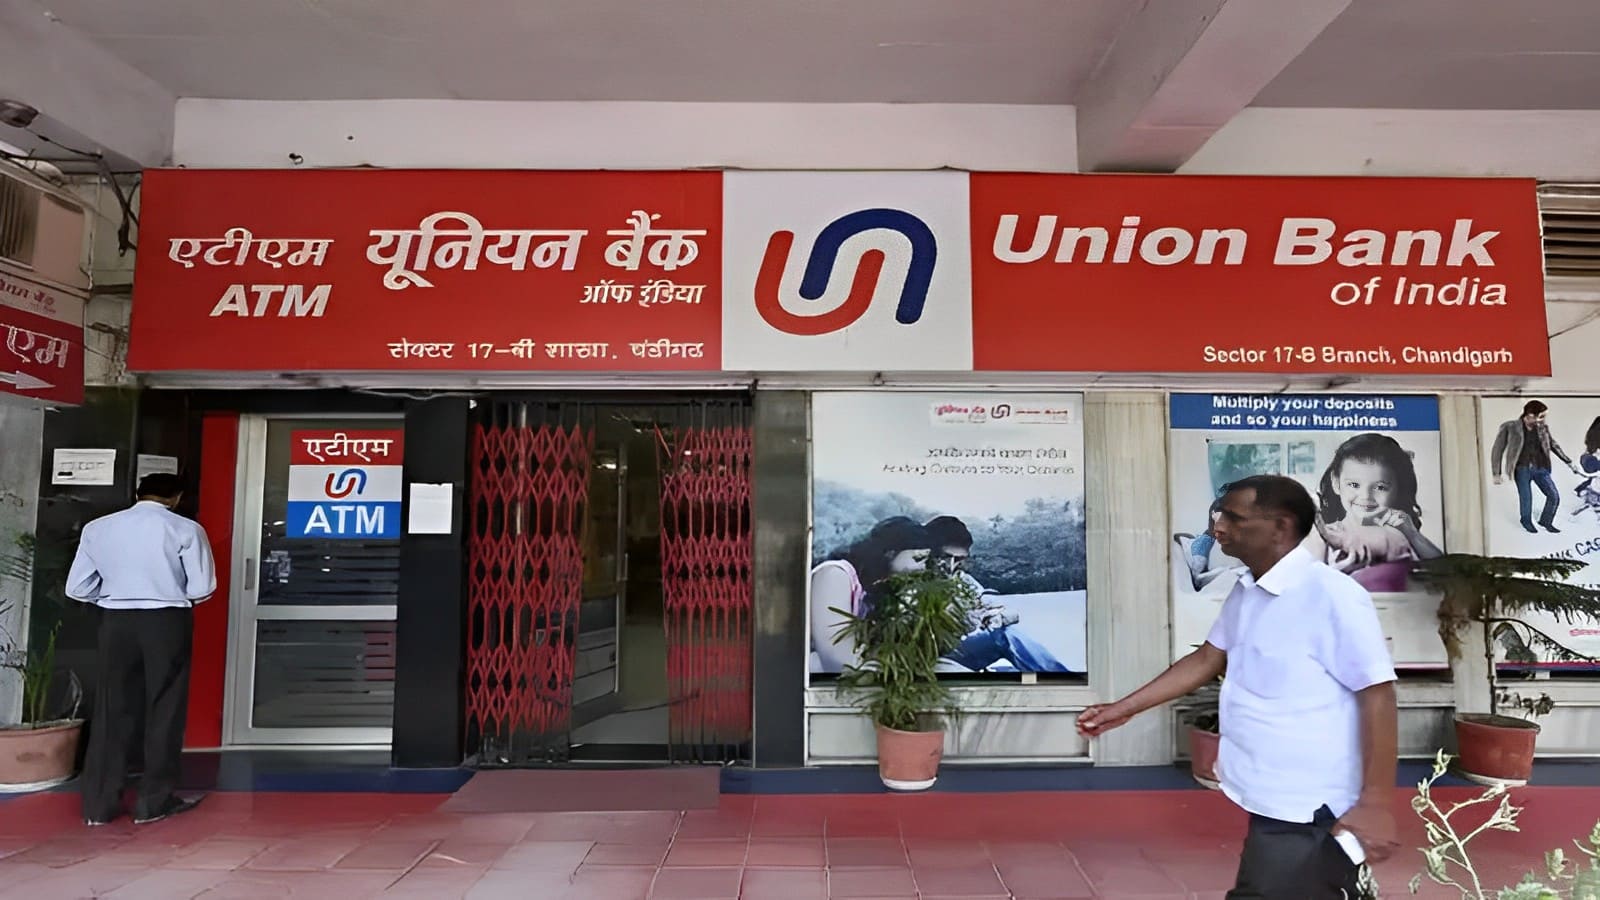 Union Bank of India plans to raise Rs 10,100 Crore